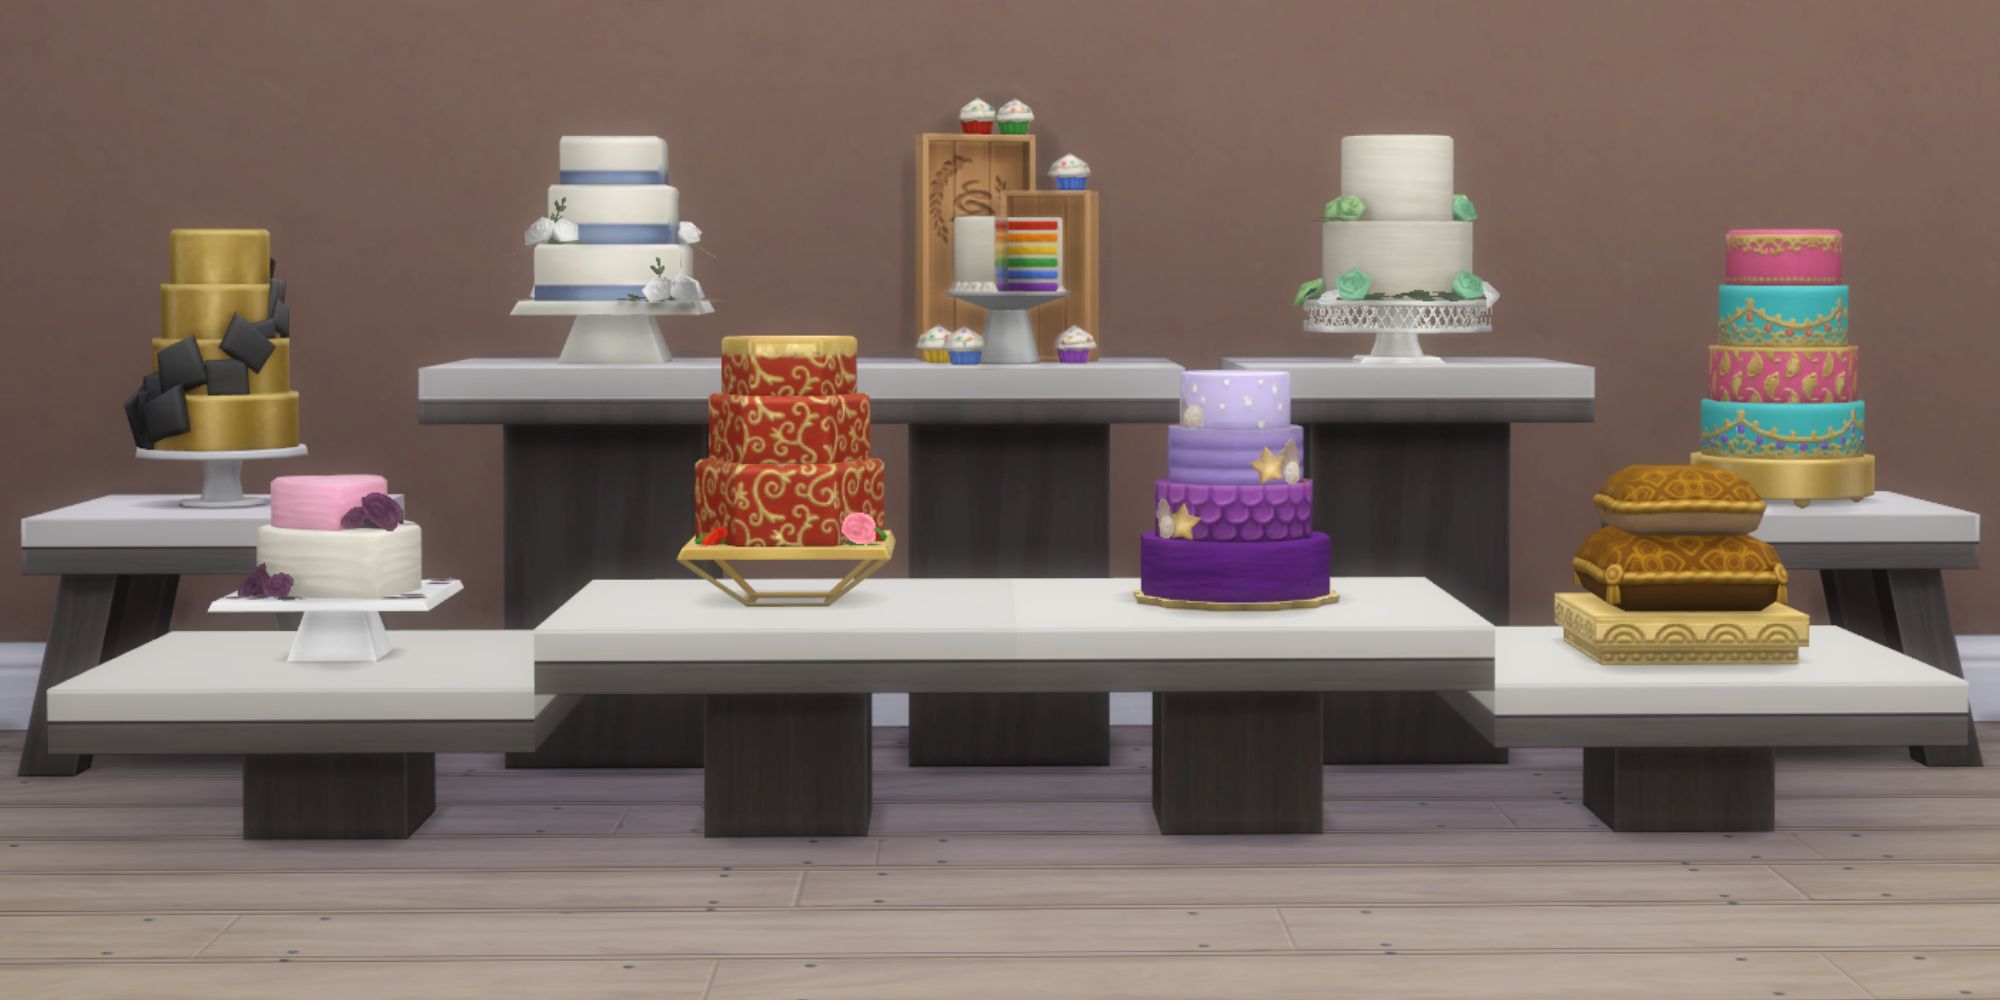 The Sims 4 My Wedding Stories Every New Wedding Cake